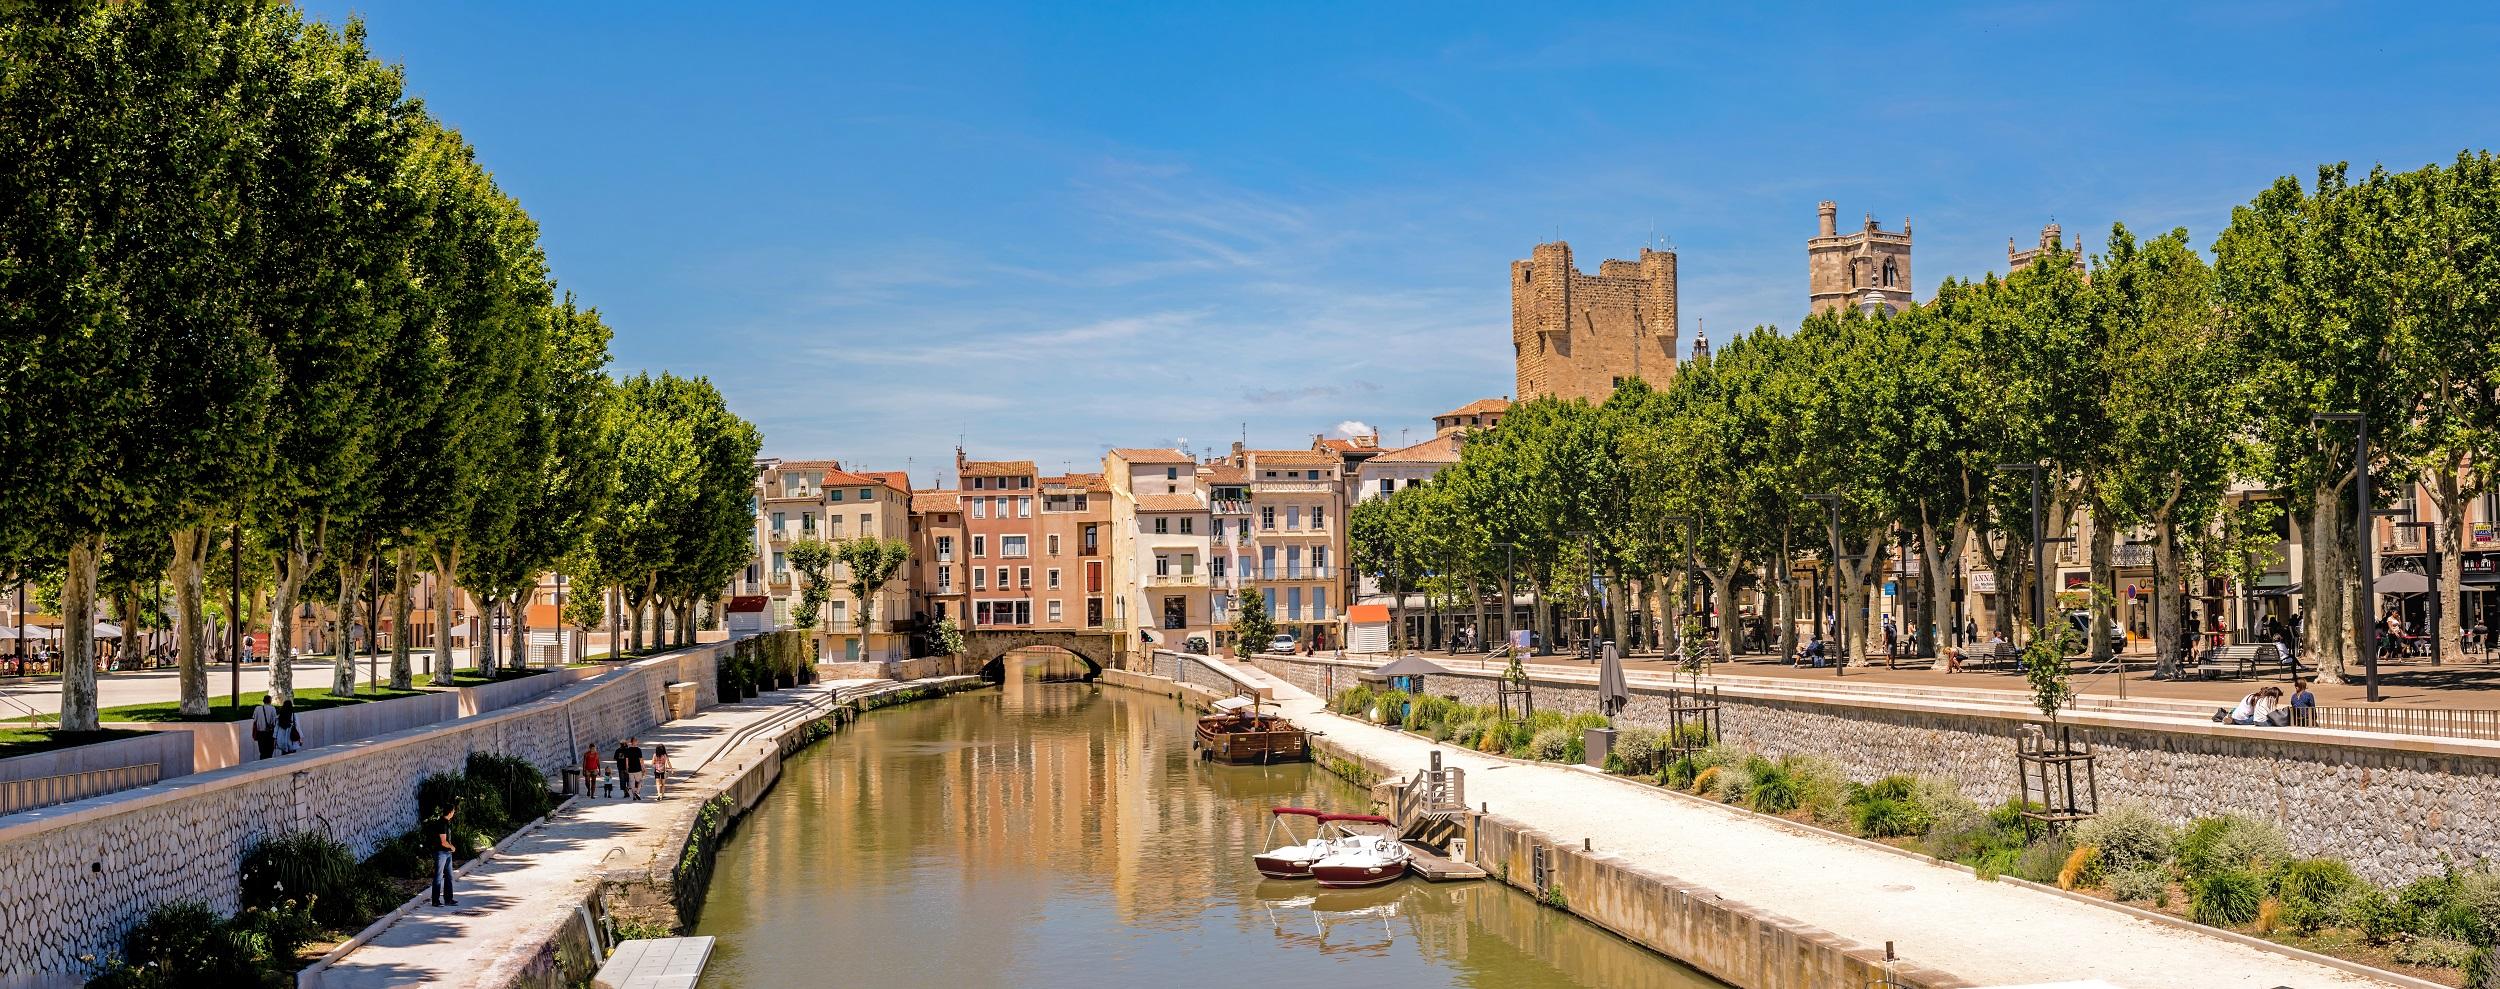 france-narbonne-barques-promenade